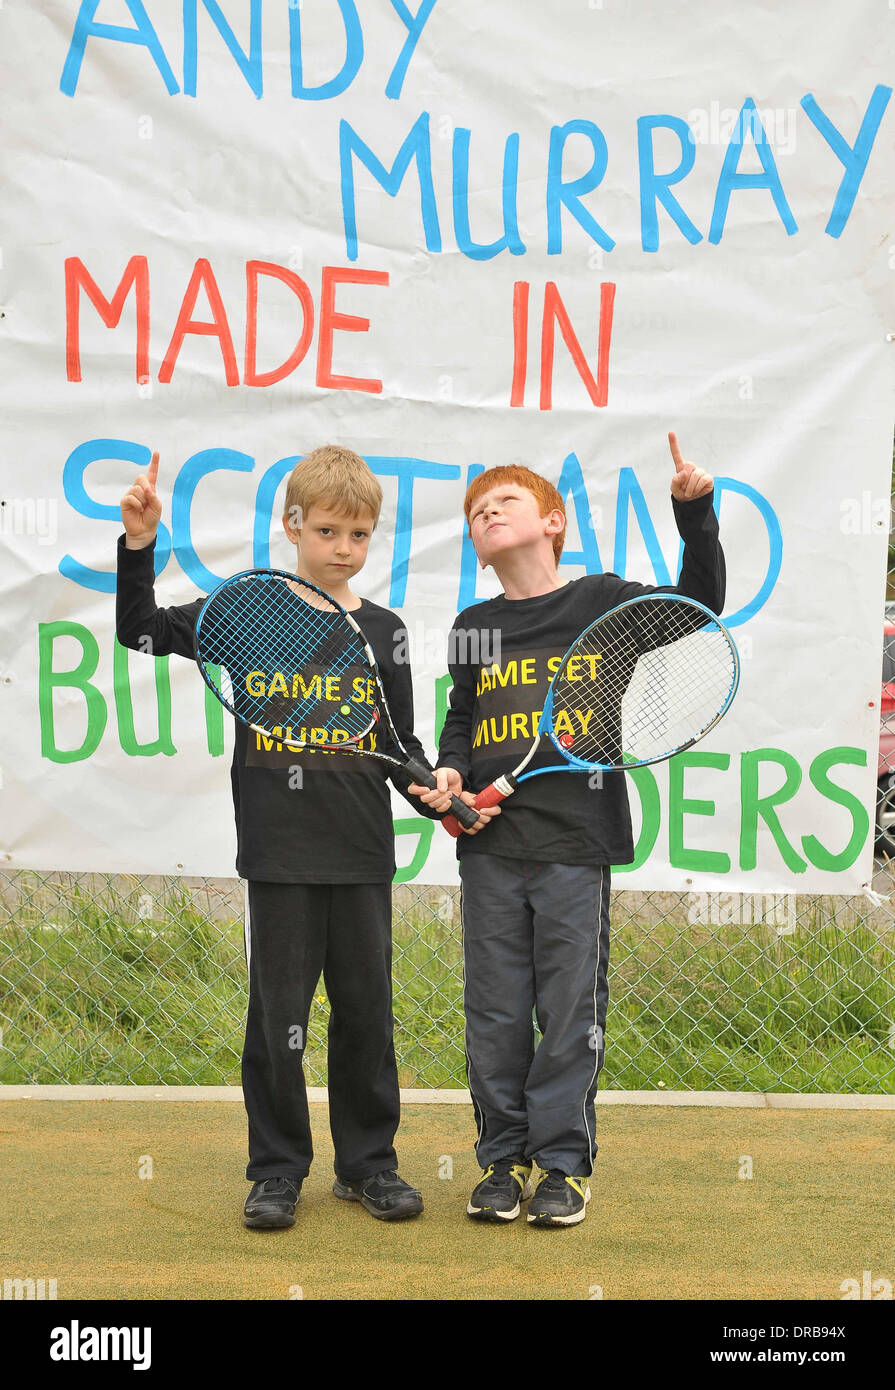 Atmosphere Residents of Andy Murray's home town of Dunblane gather together to show their support as he takes on Roger Federer in the Wimbledon Men's Singles Final at the All England Tennis Club Dunblane, Scotland - 08.07.12 Stock Photo